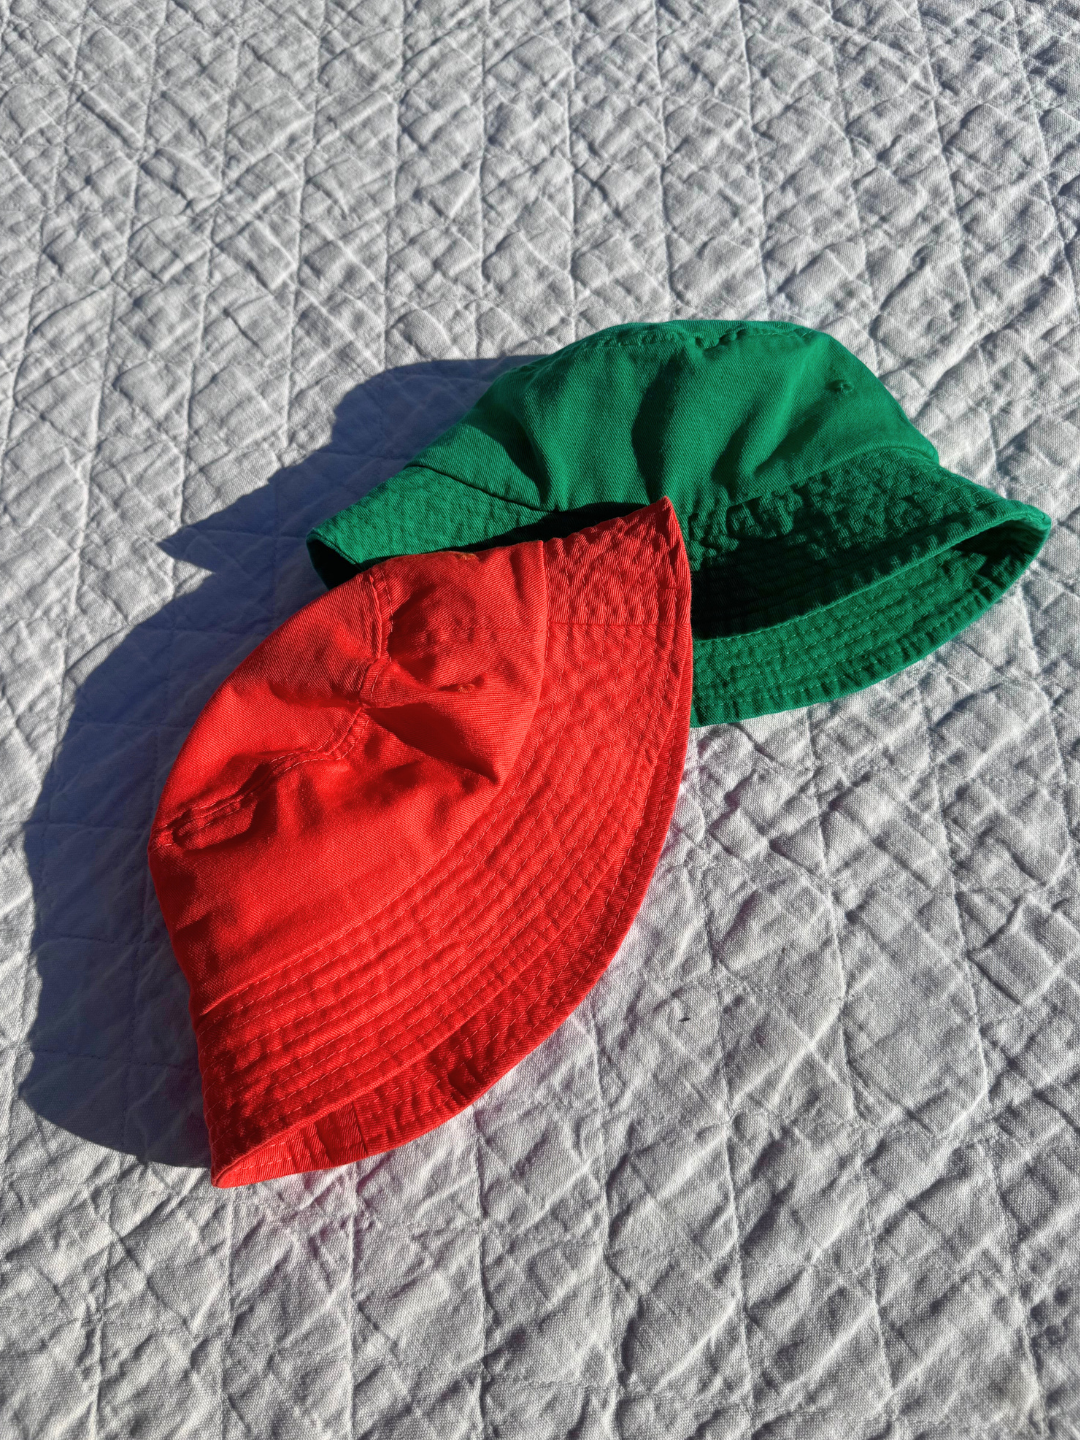 Green | TWO KID'S PICNIC BUCKET HATS  IN TOMATO ORANGE AND KELLY GREEN ARE LAID FLAT ON BLANKET